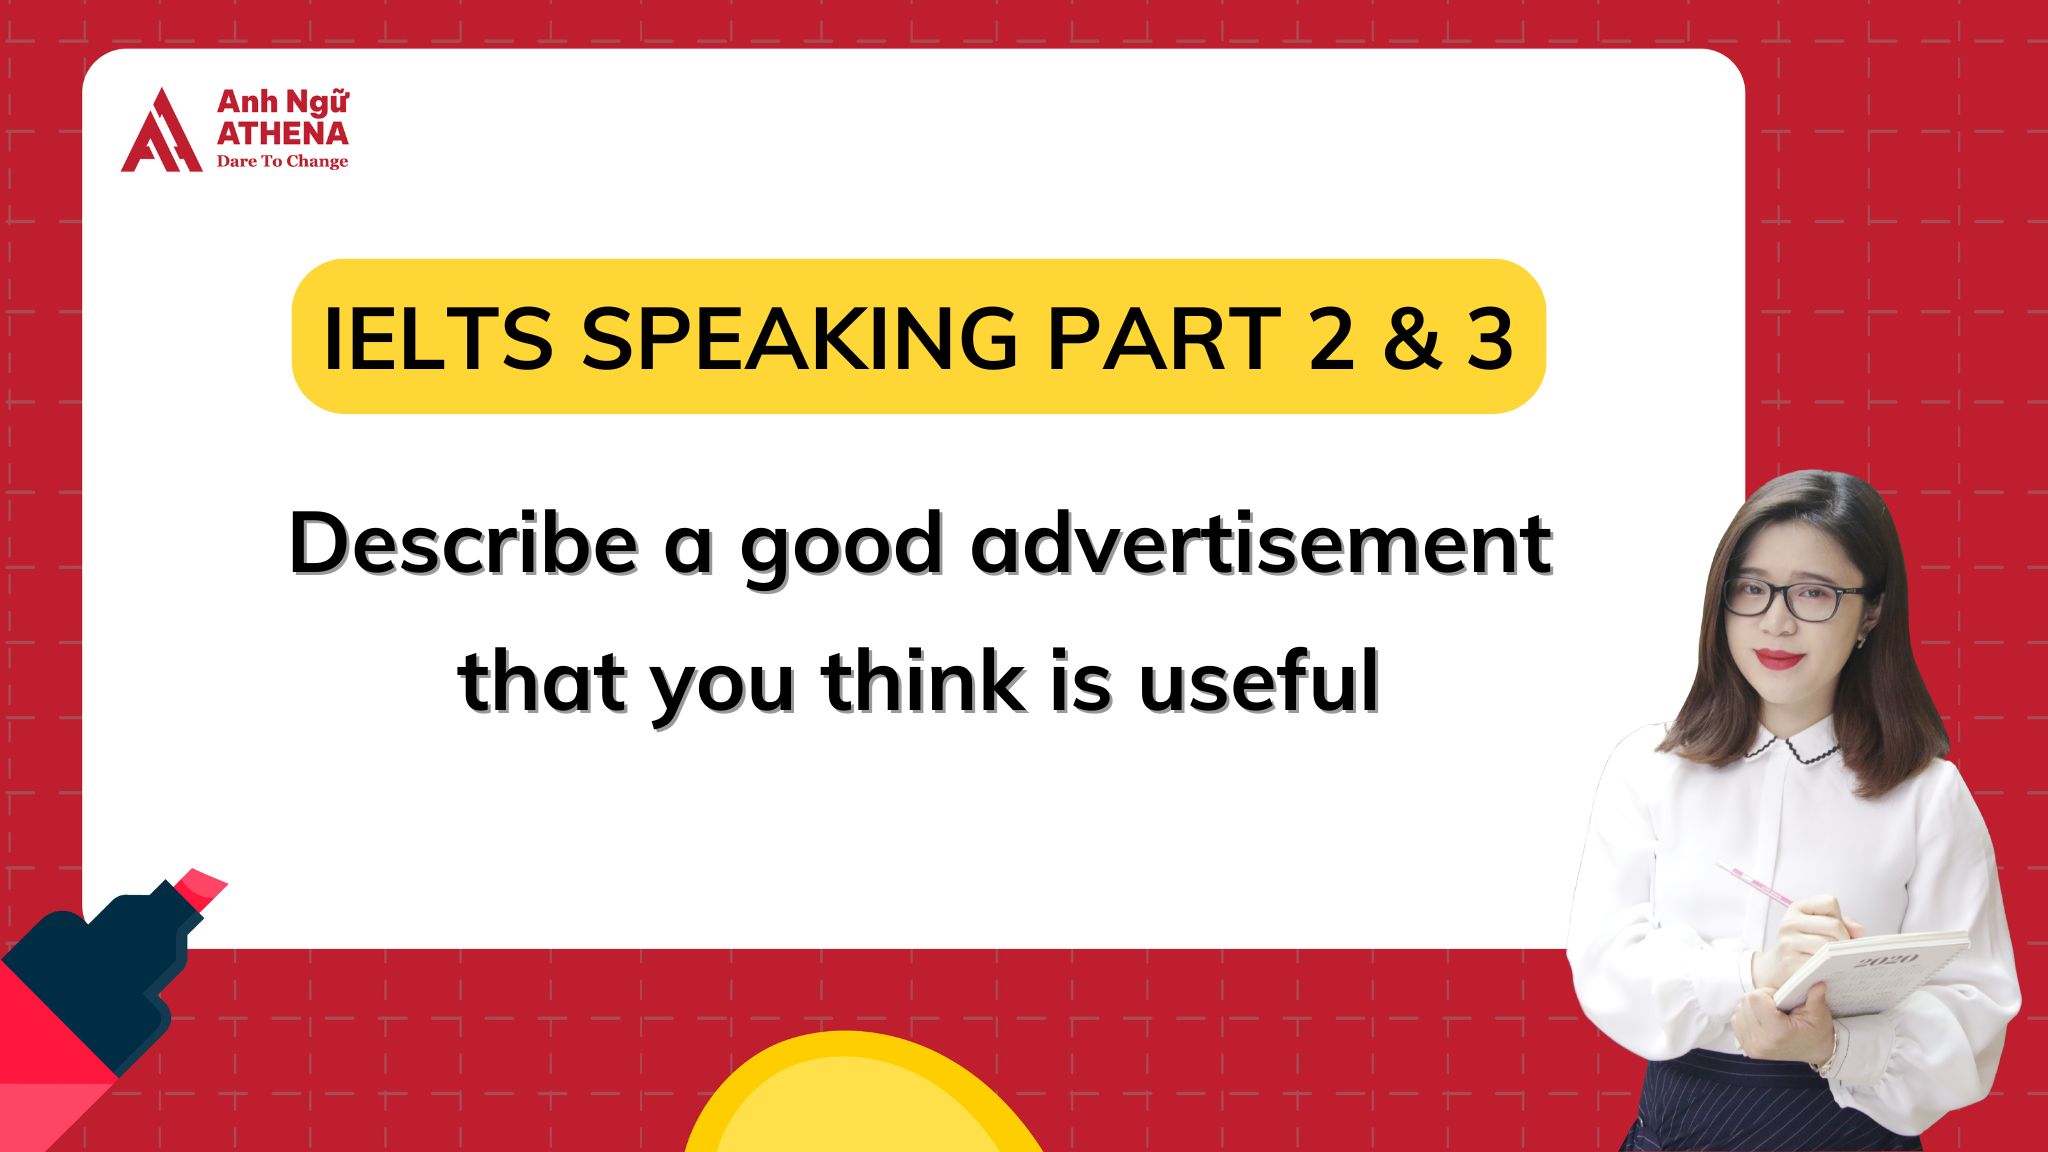 Giải đề: Describe a good advertisement that you think is useful.